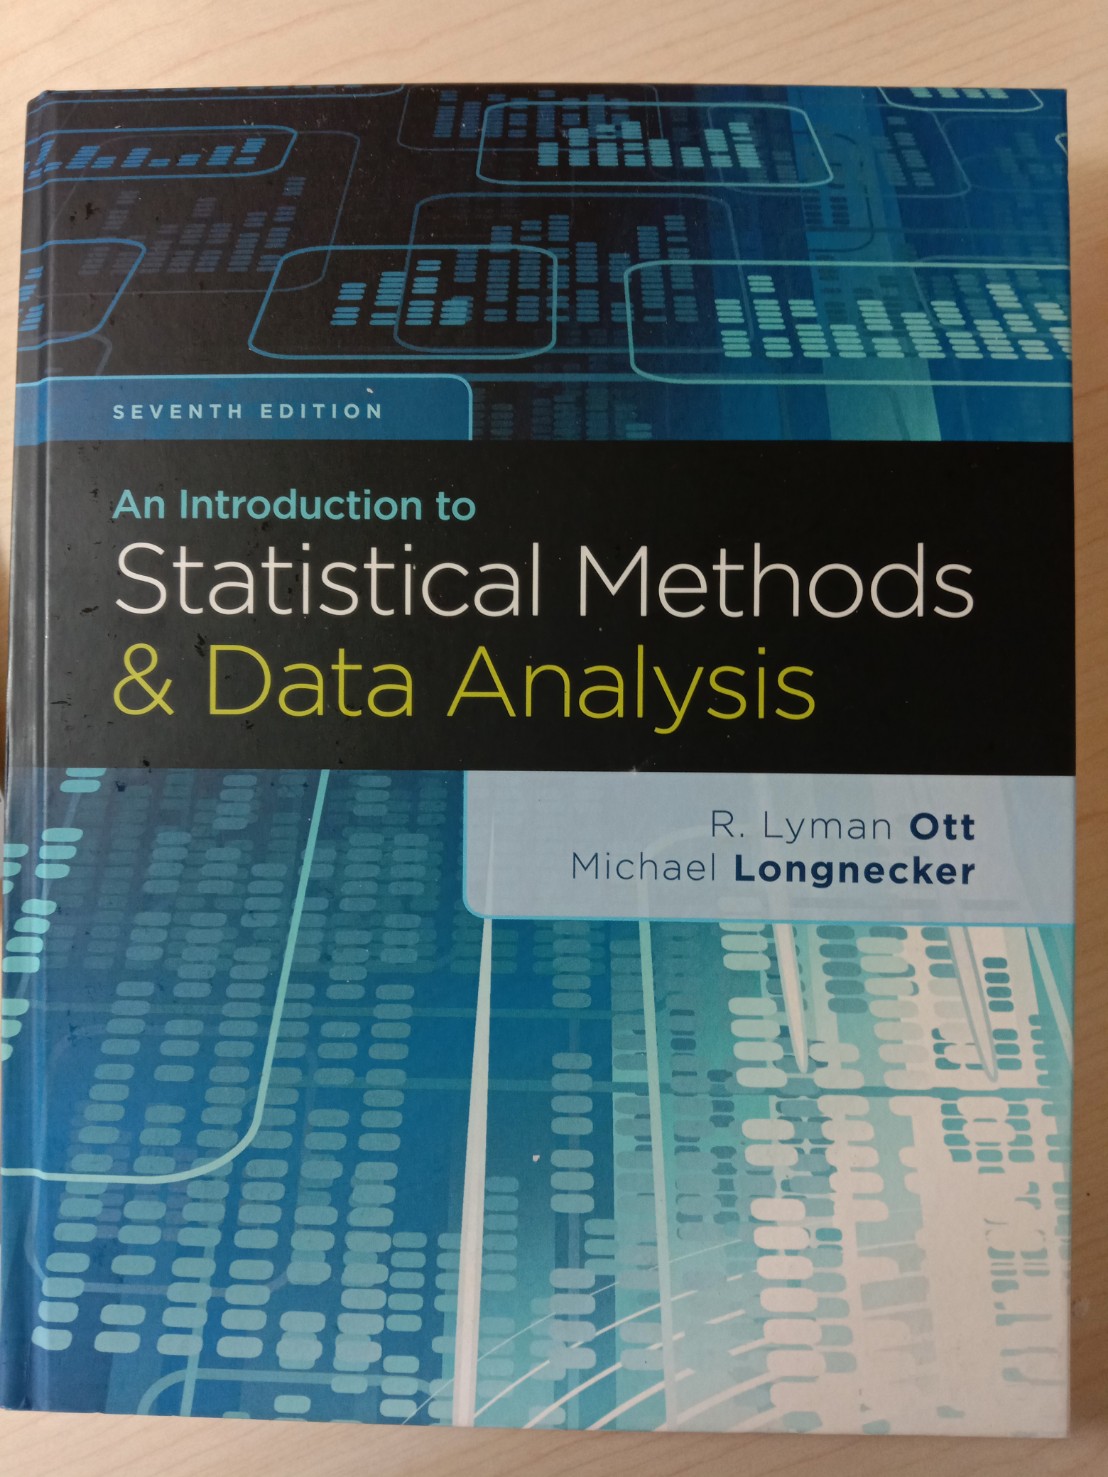 An Introduction to Statistical Methods and Data Analysis 詳細資料